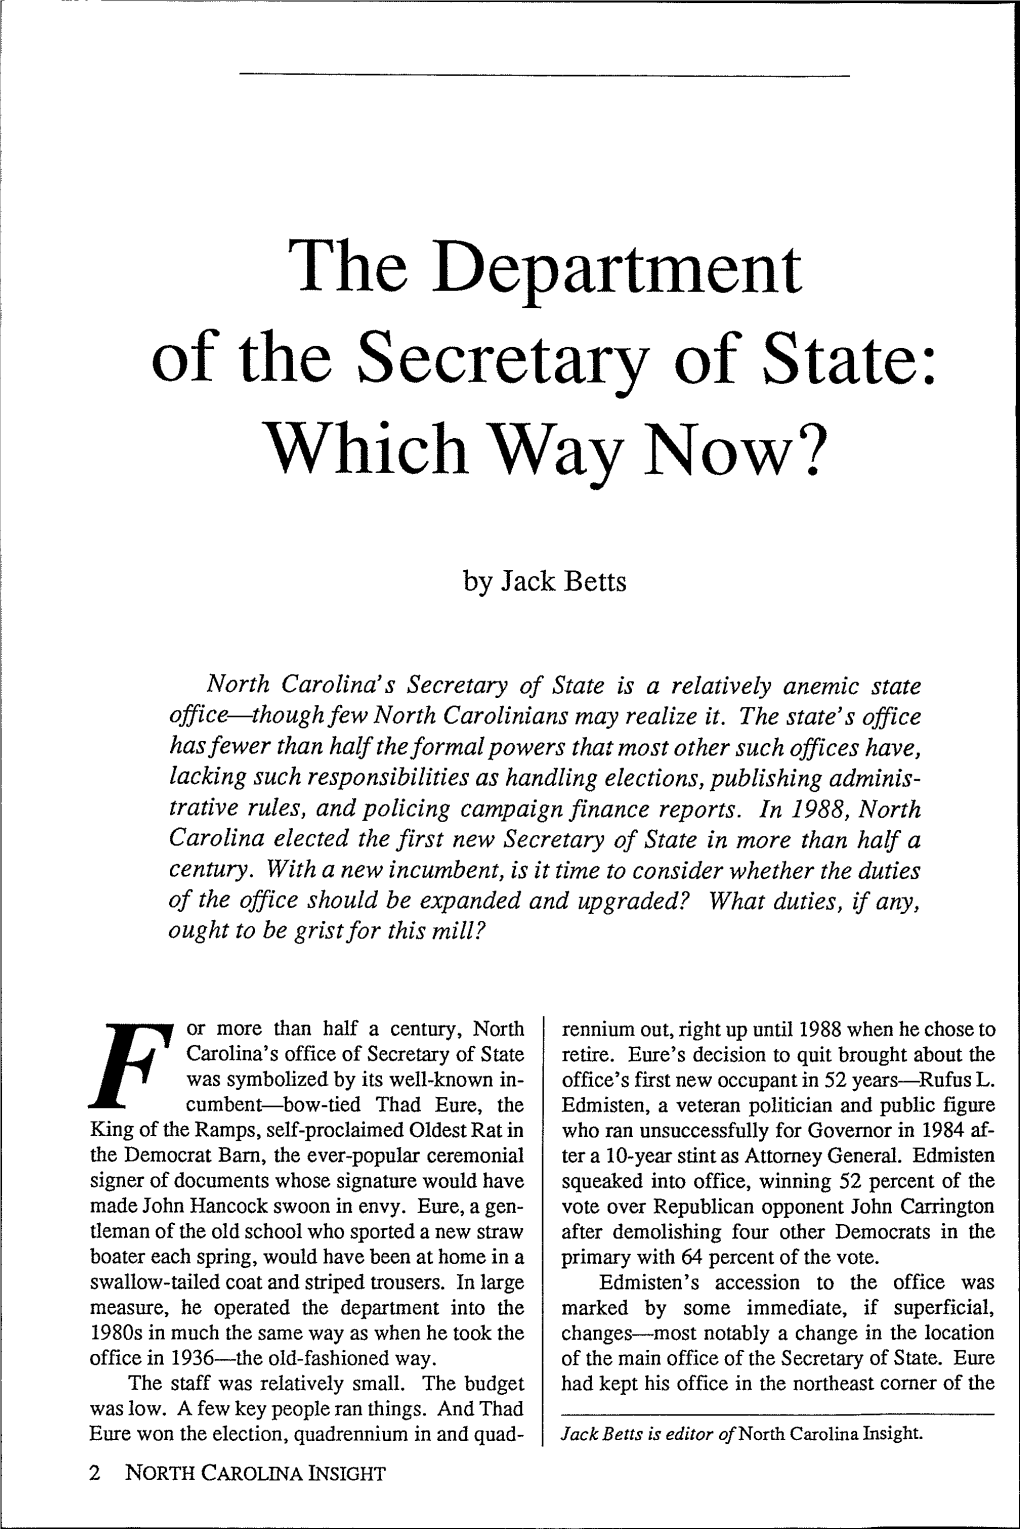 The Department of the Secretary of State: Which Way Now?